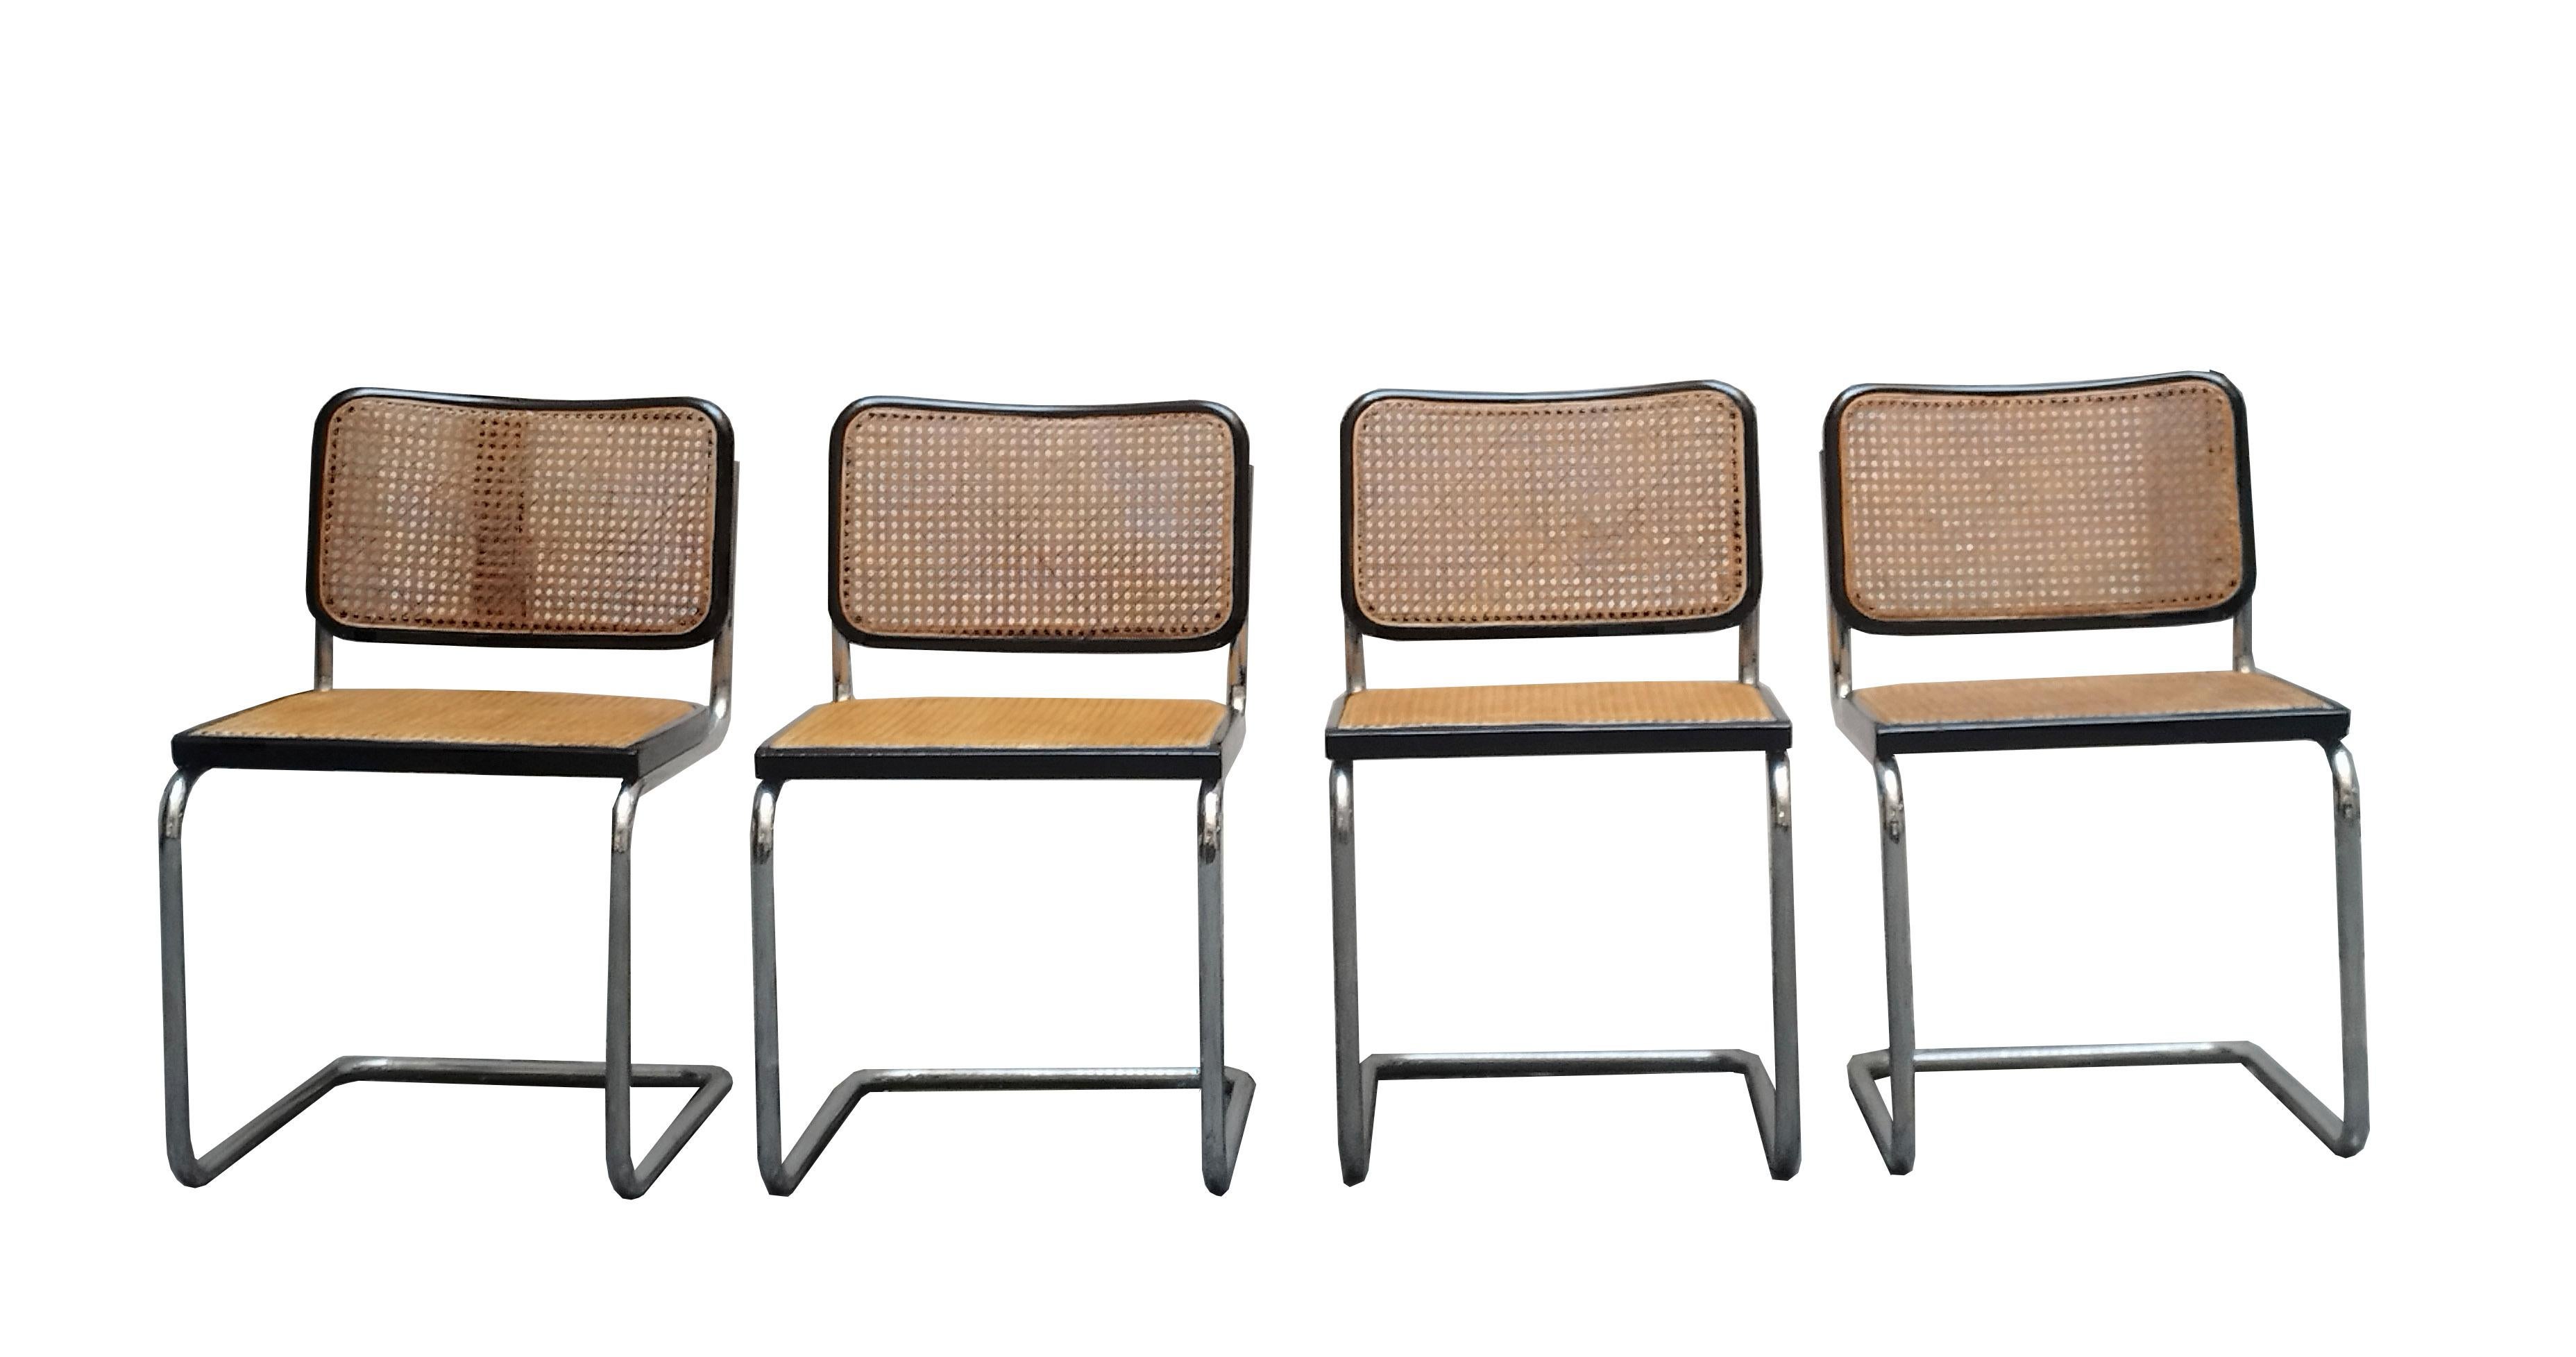 Group of four chairs Mod. Cesca by Marcel Lajos Breuer for Gavina - Italy - with original label.
Walnut backrest, chromed steel tubular frame and Vienna straw. Breuer's Cesca chair has spanned the entire history of 20th century design. Its size and